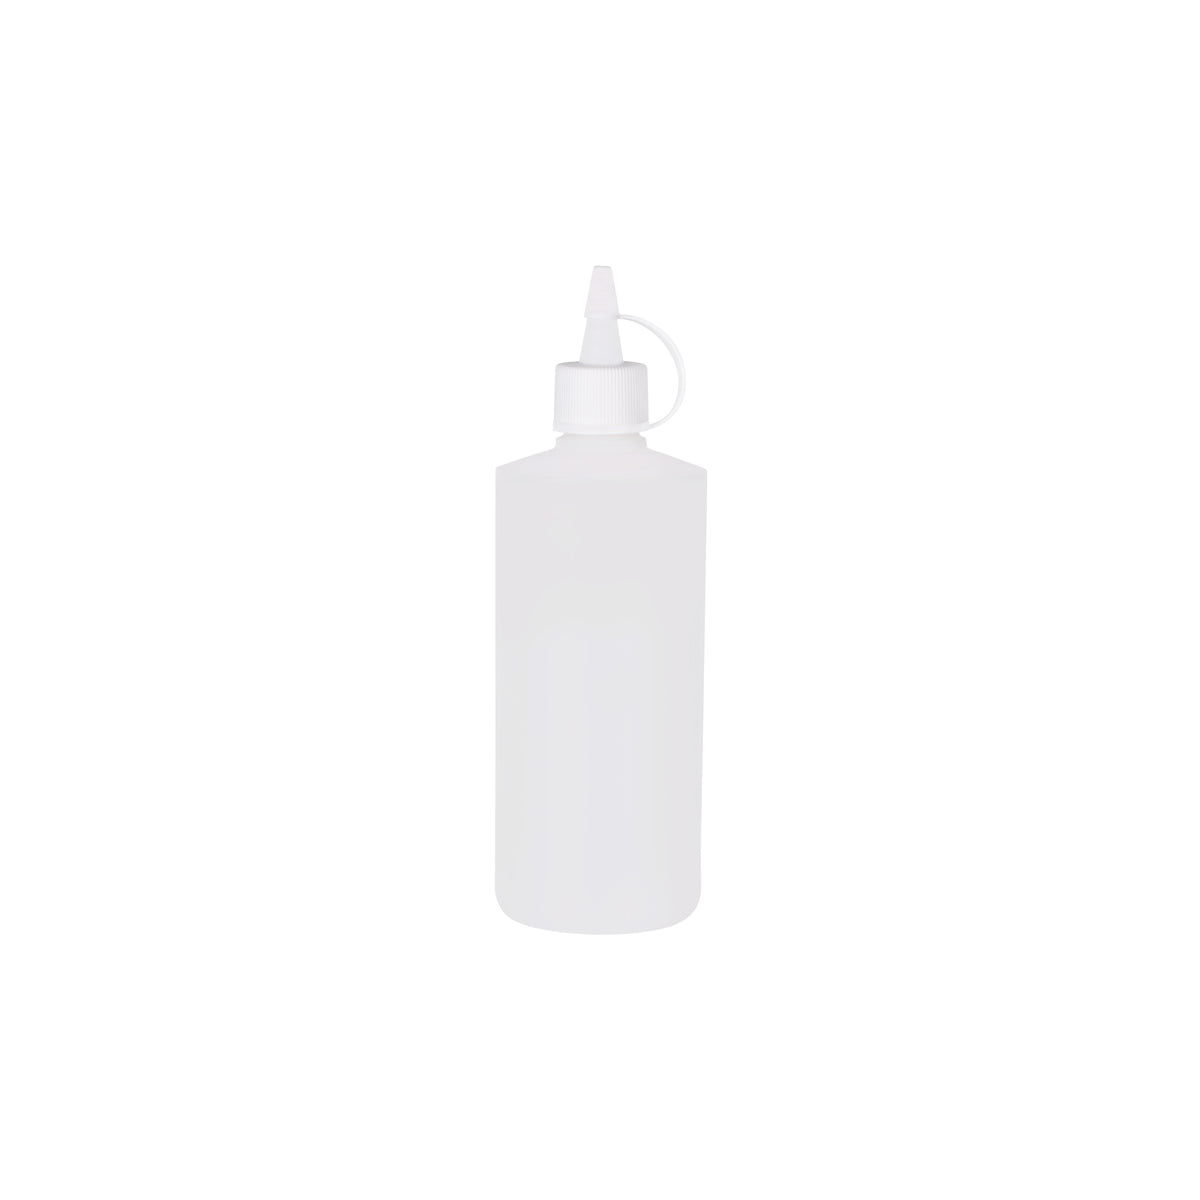 06845 Chef Inox Squeeze Bottle Clear 500ml Tomkin Australia Hospitality Supplies